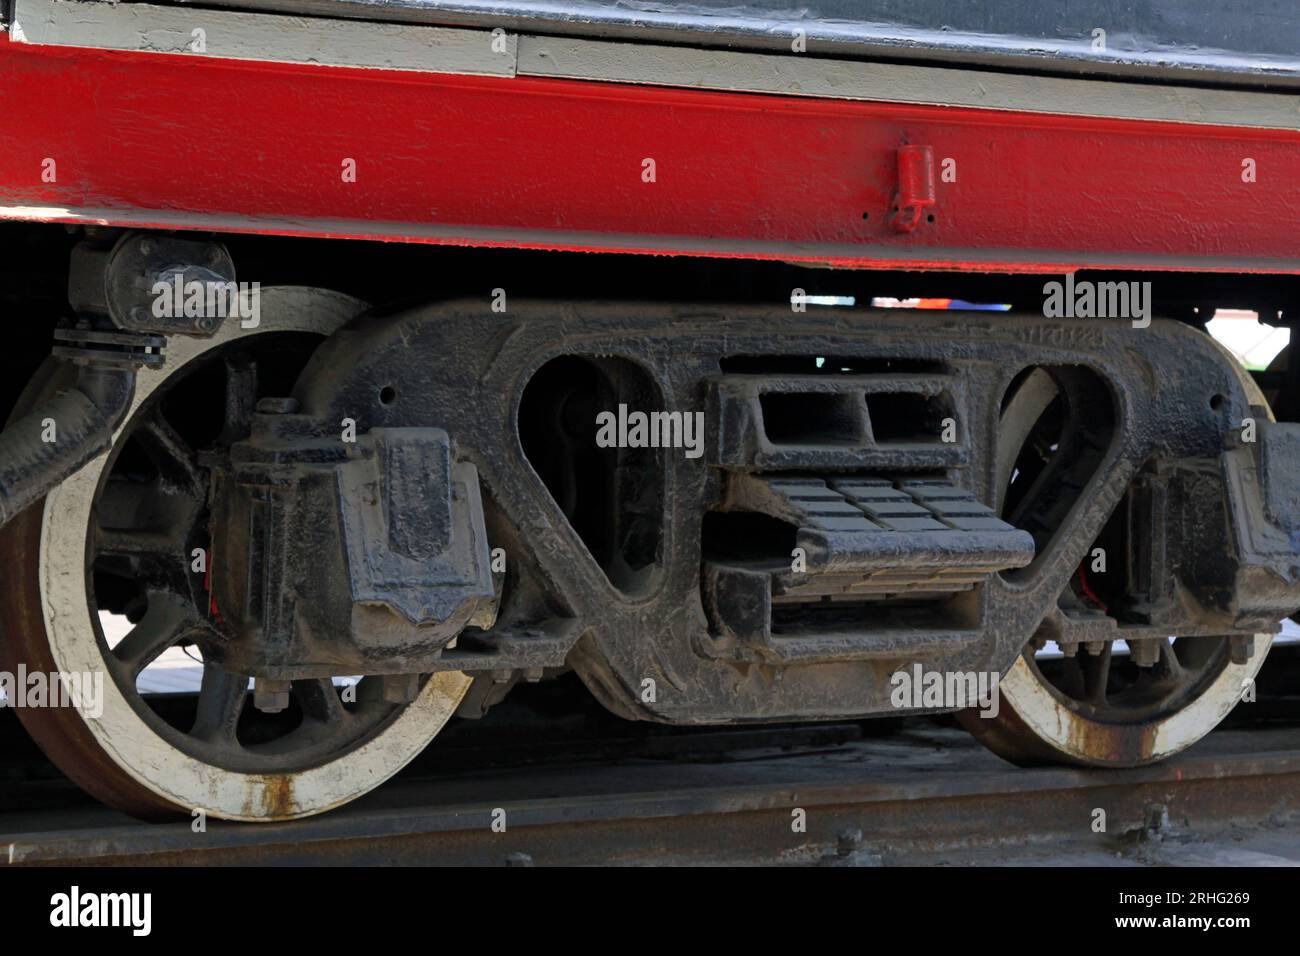 steam locomotive wheel and the damping device, closeup of photo Stock Photo